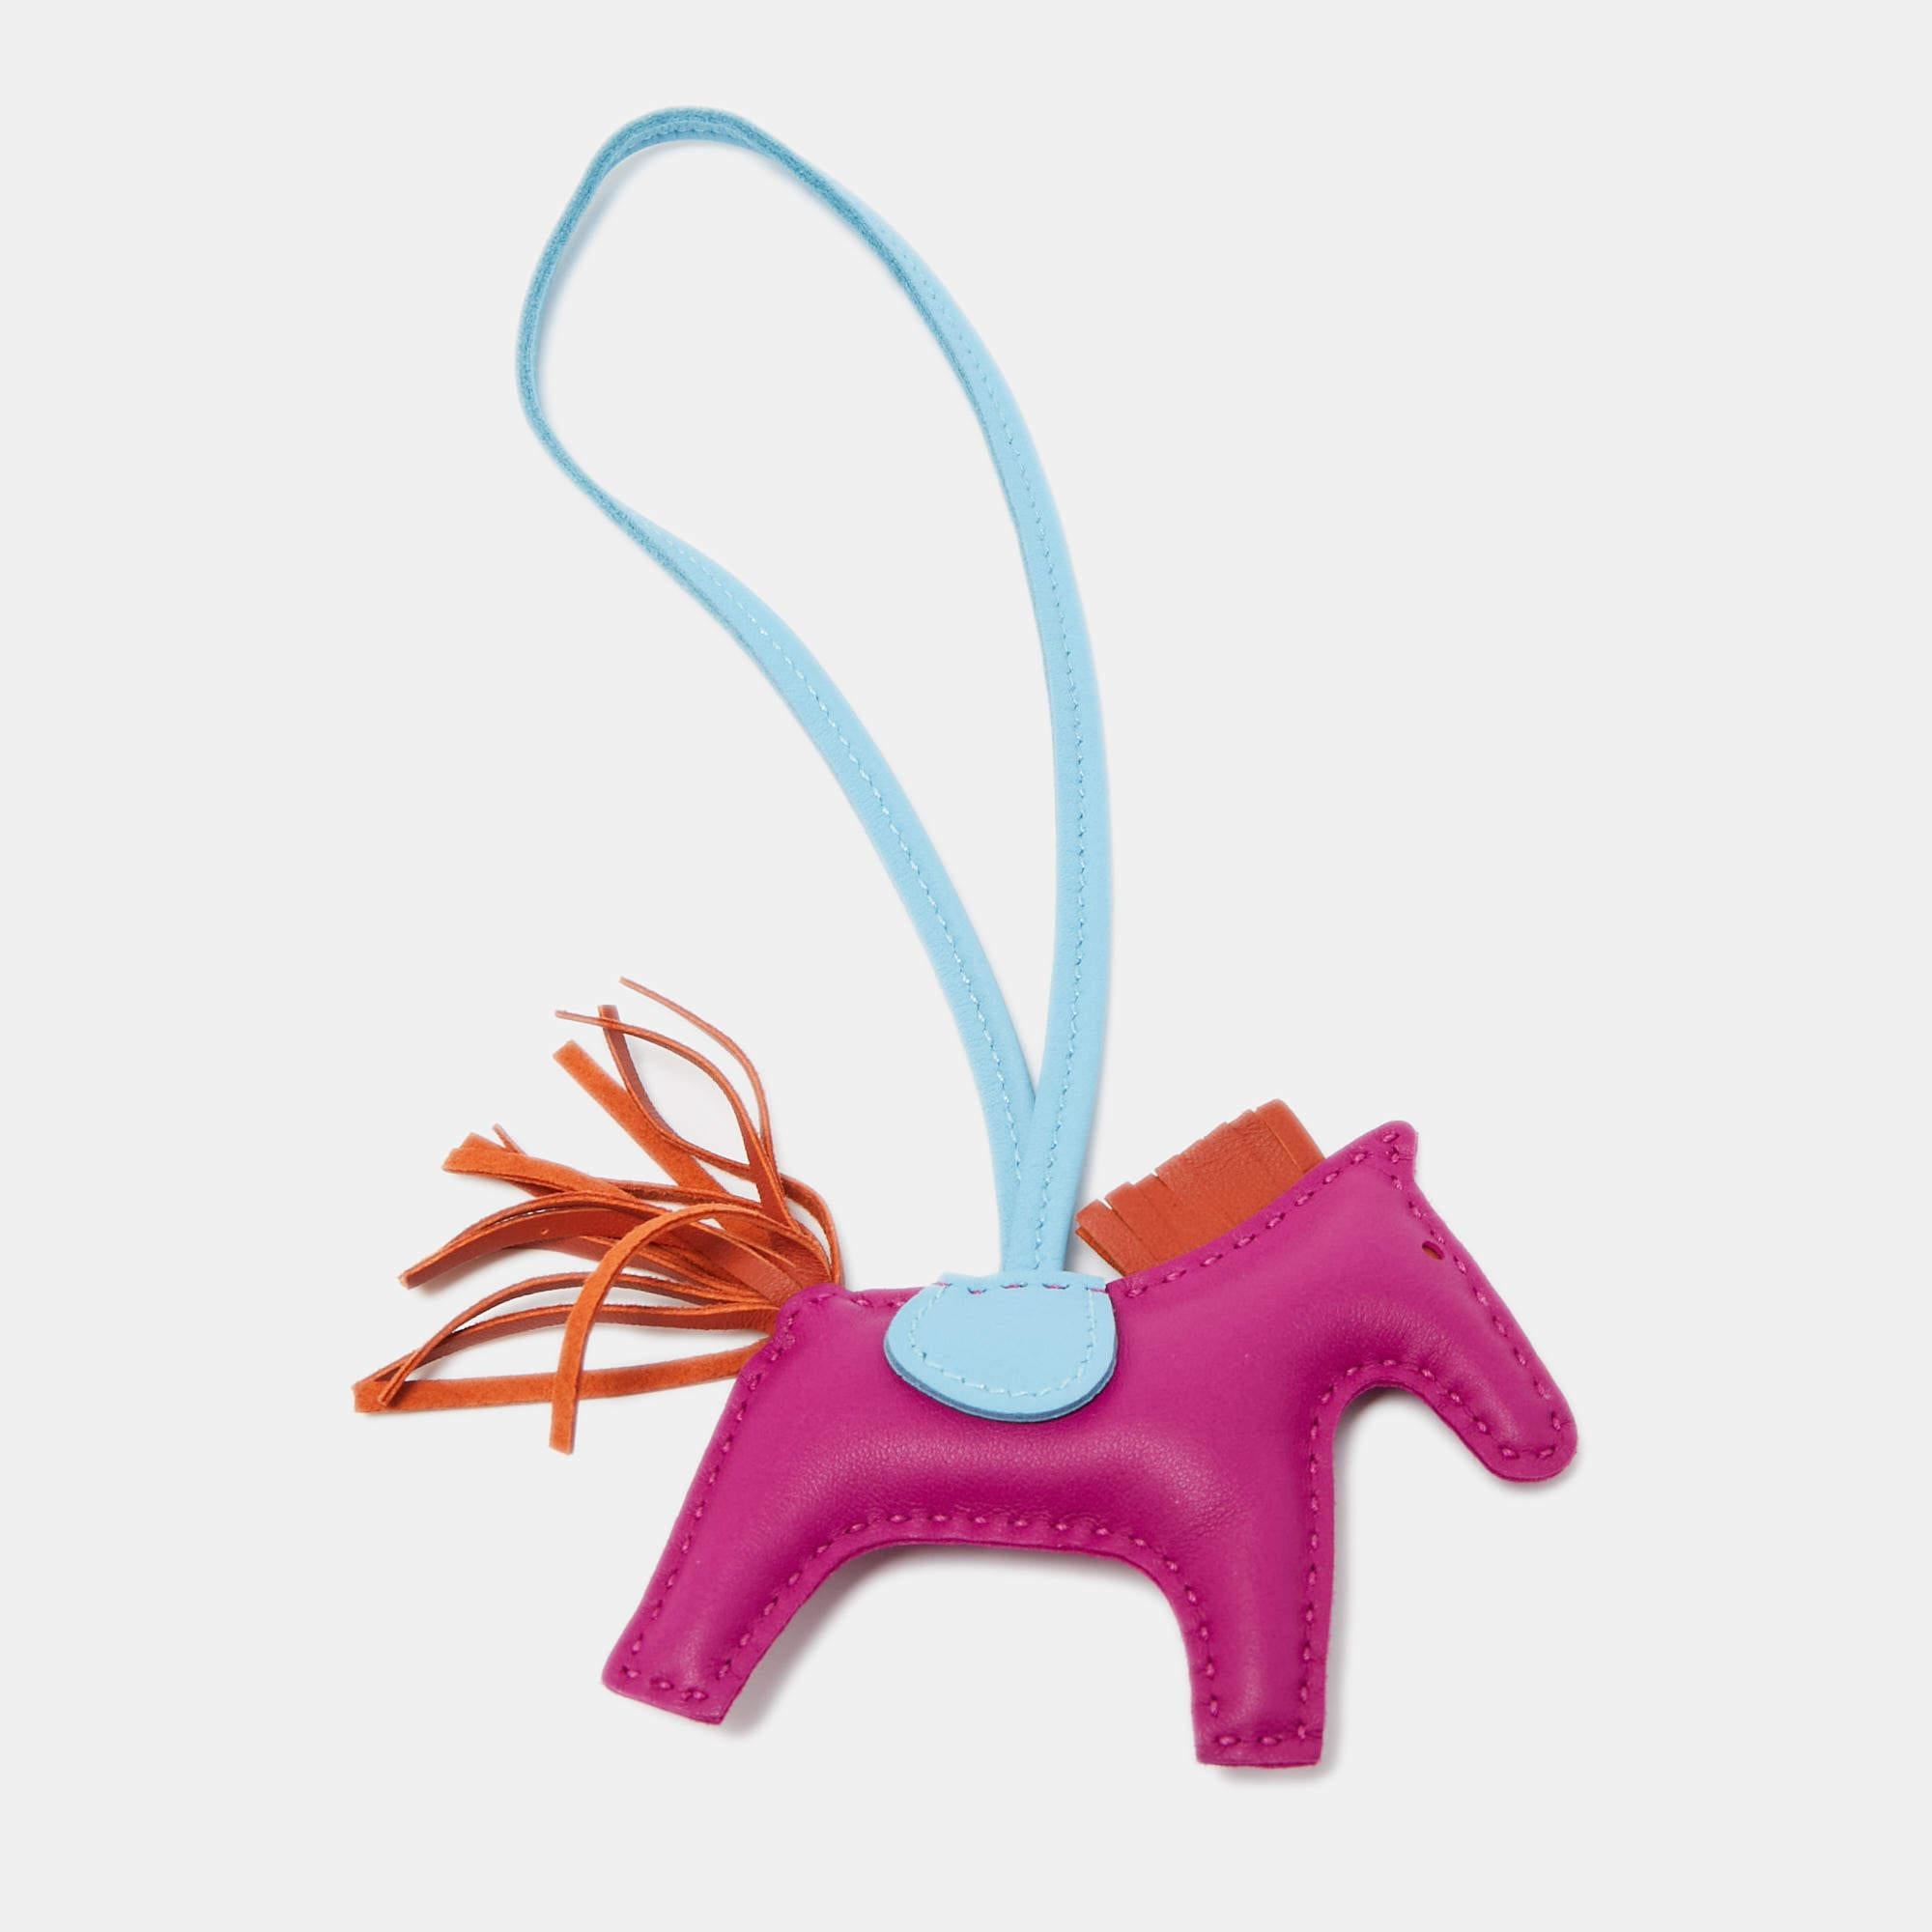 Rodeo bag charms by Hermès come close to being as rare as some of the brand's bags. Collected by fans of Hermès and handbags alike, these little galloping charms are dream pieces to dress up one's precious bags.

Includes: Original Box, Info Booklet